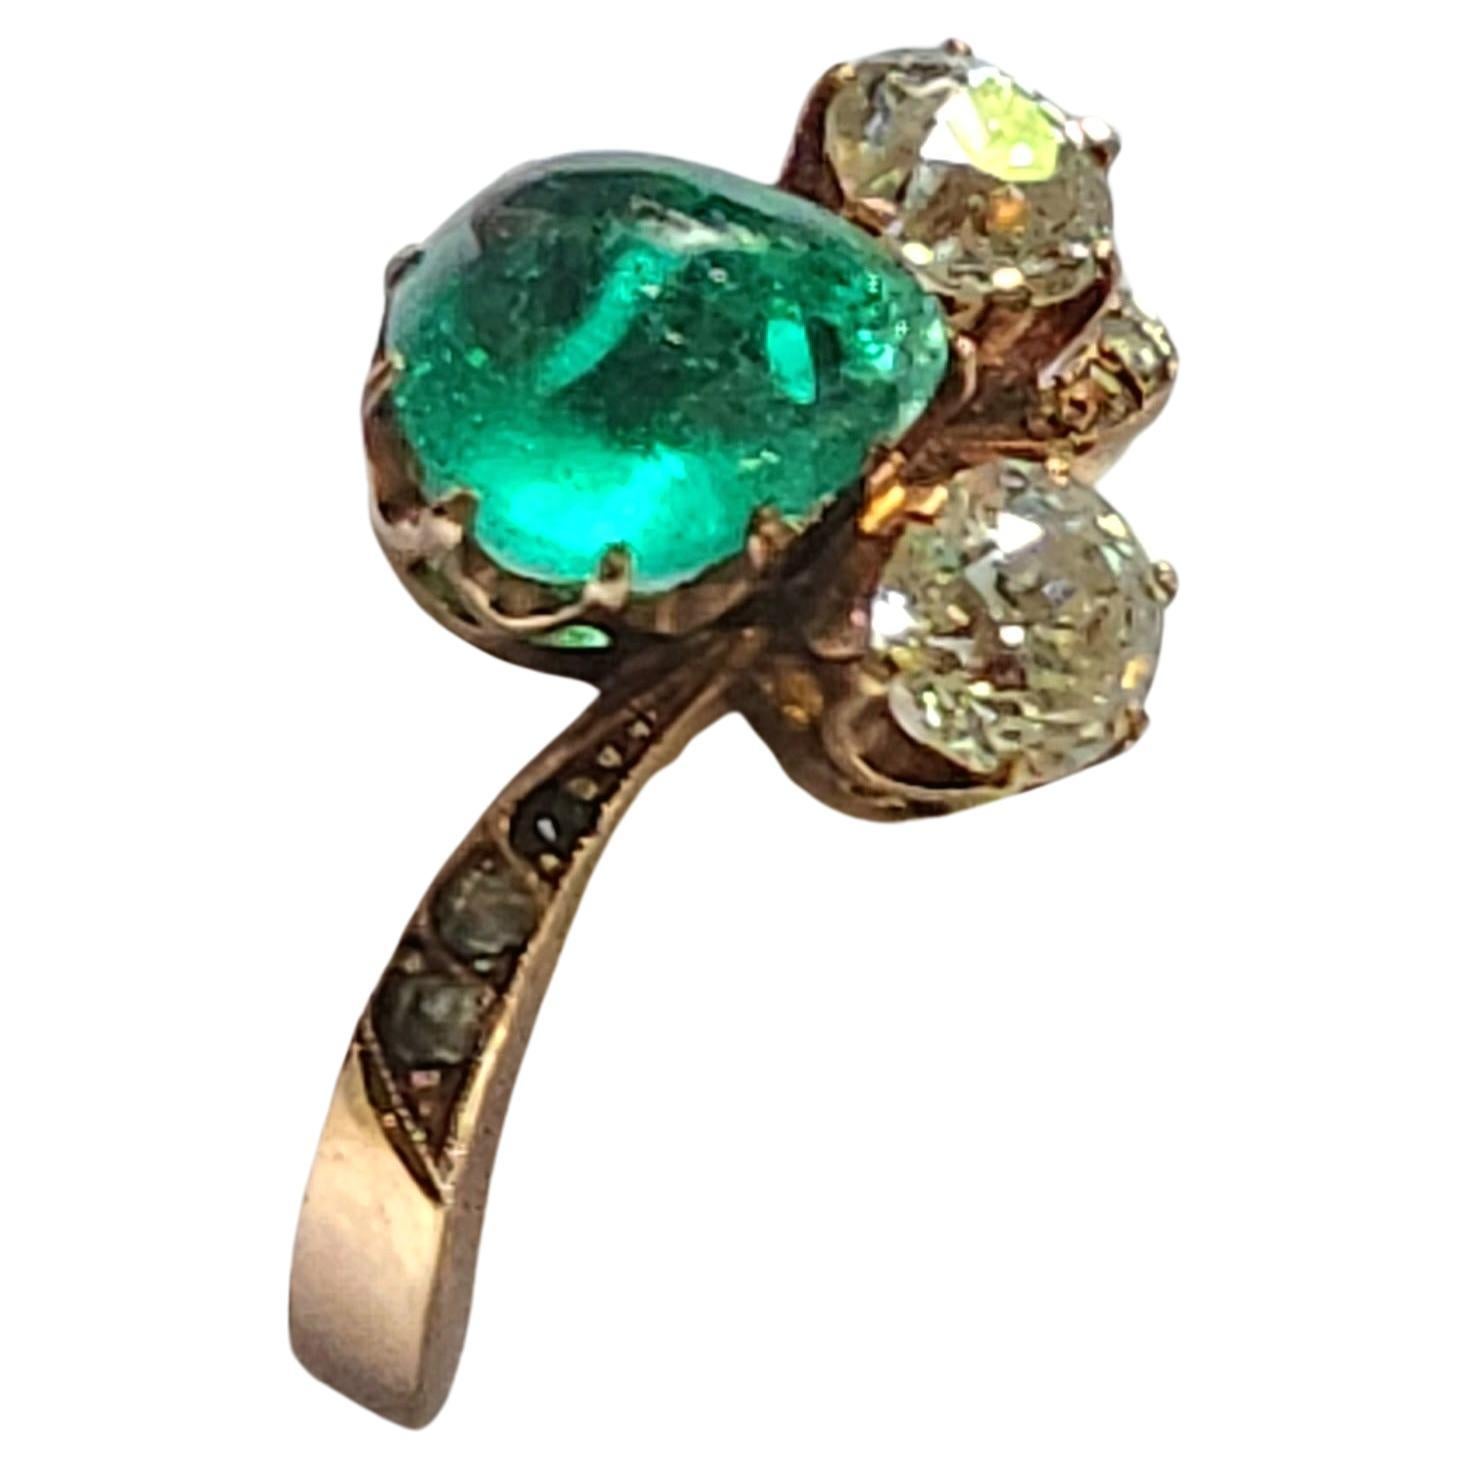 Vintage 14k gold ring centered with cobochon natural green emerald in pear shape cut flanked with 2 old mine cut diamonds estimate 1 carat ring was made during the soviet perioud 1940s/1950s hall marked 583 gold standard and initial maker mark 